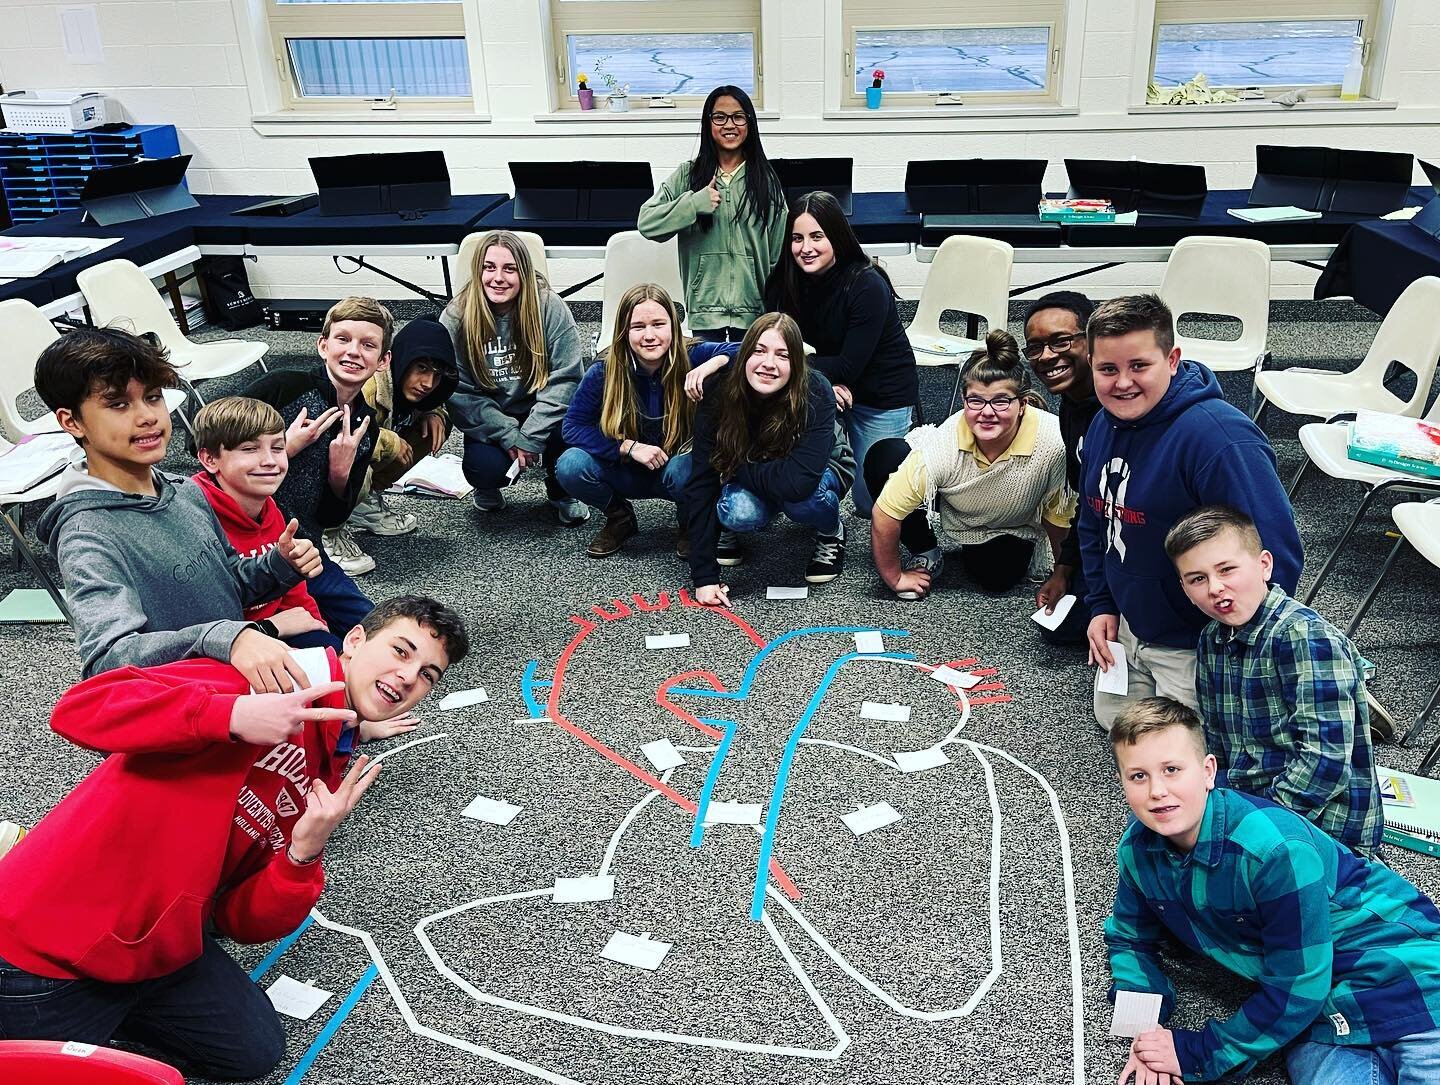 Our 6th-8th graders have been studying various systems of the body in science class. To learn more about the circulatory system the students labeled the large heart. Each student was assigned to be a hemoglobin, platelet, carbon dioxide, or oxygen. T